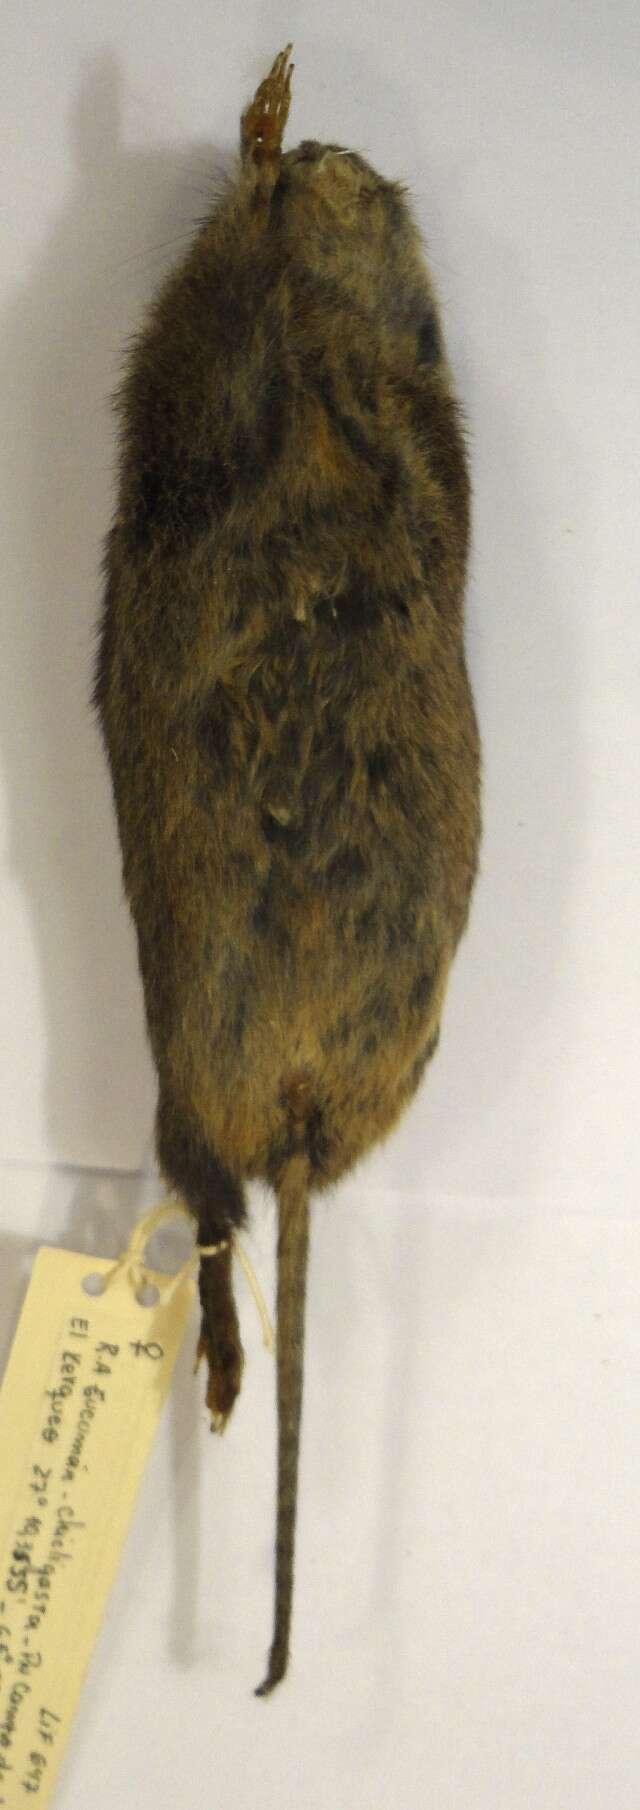 Image of Bolo Mouse